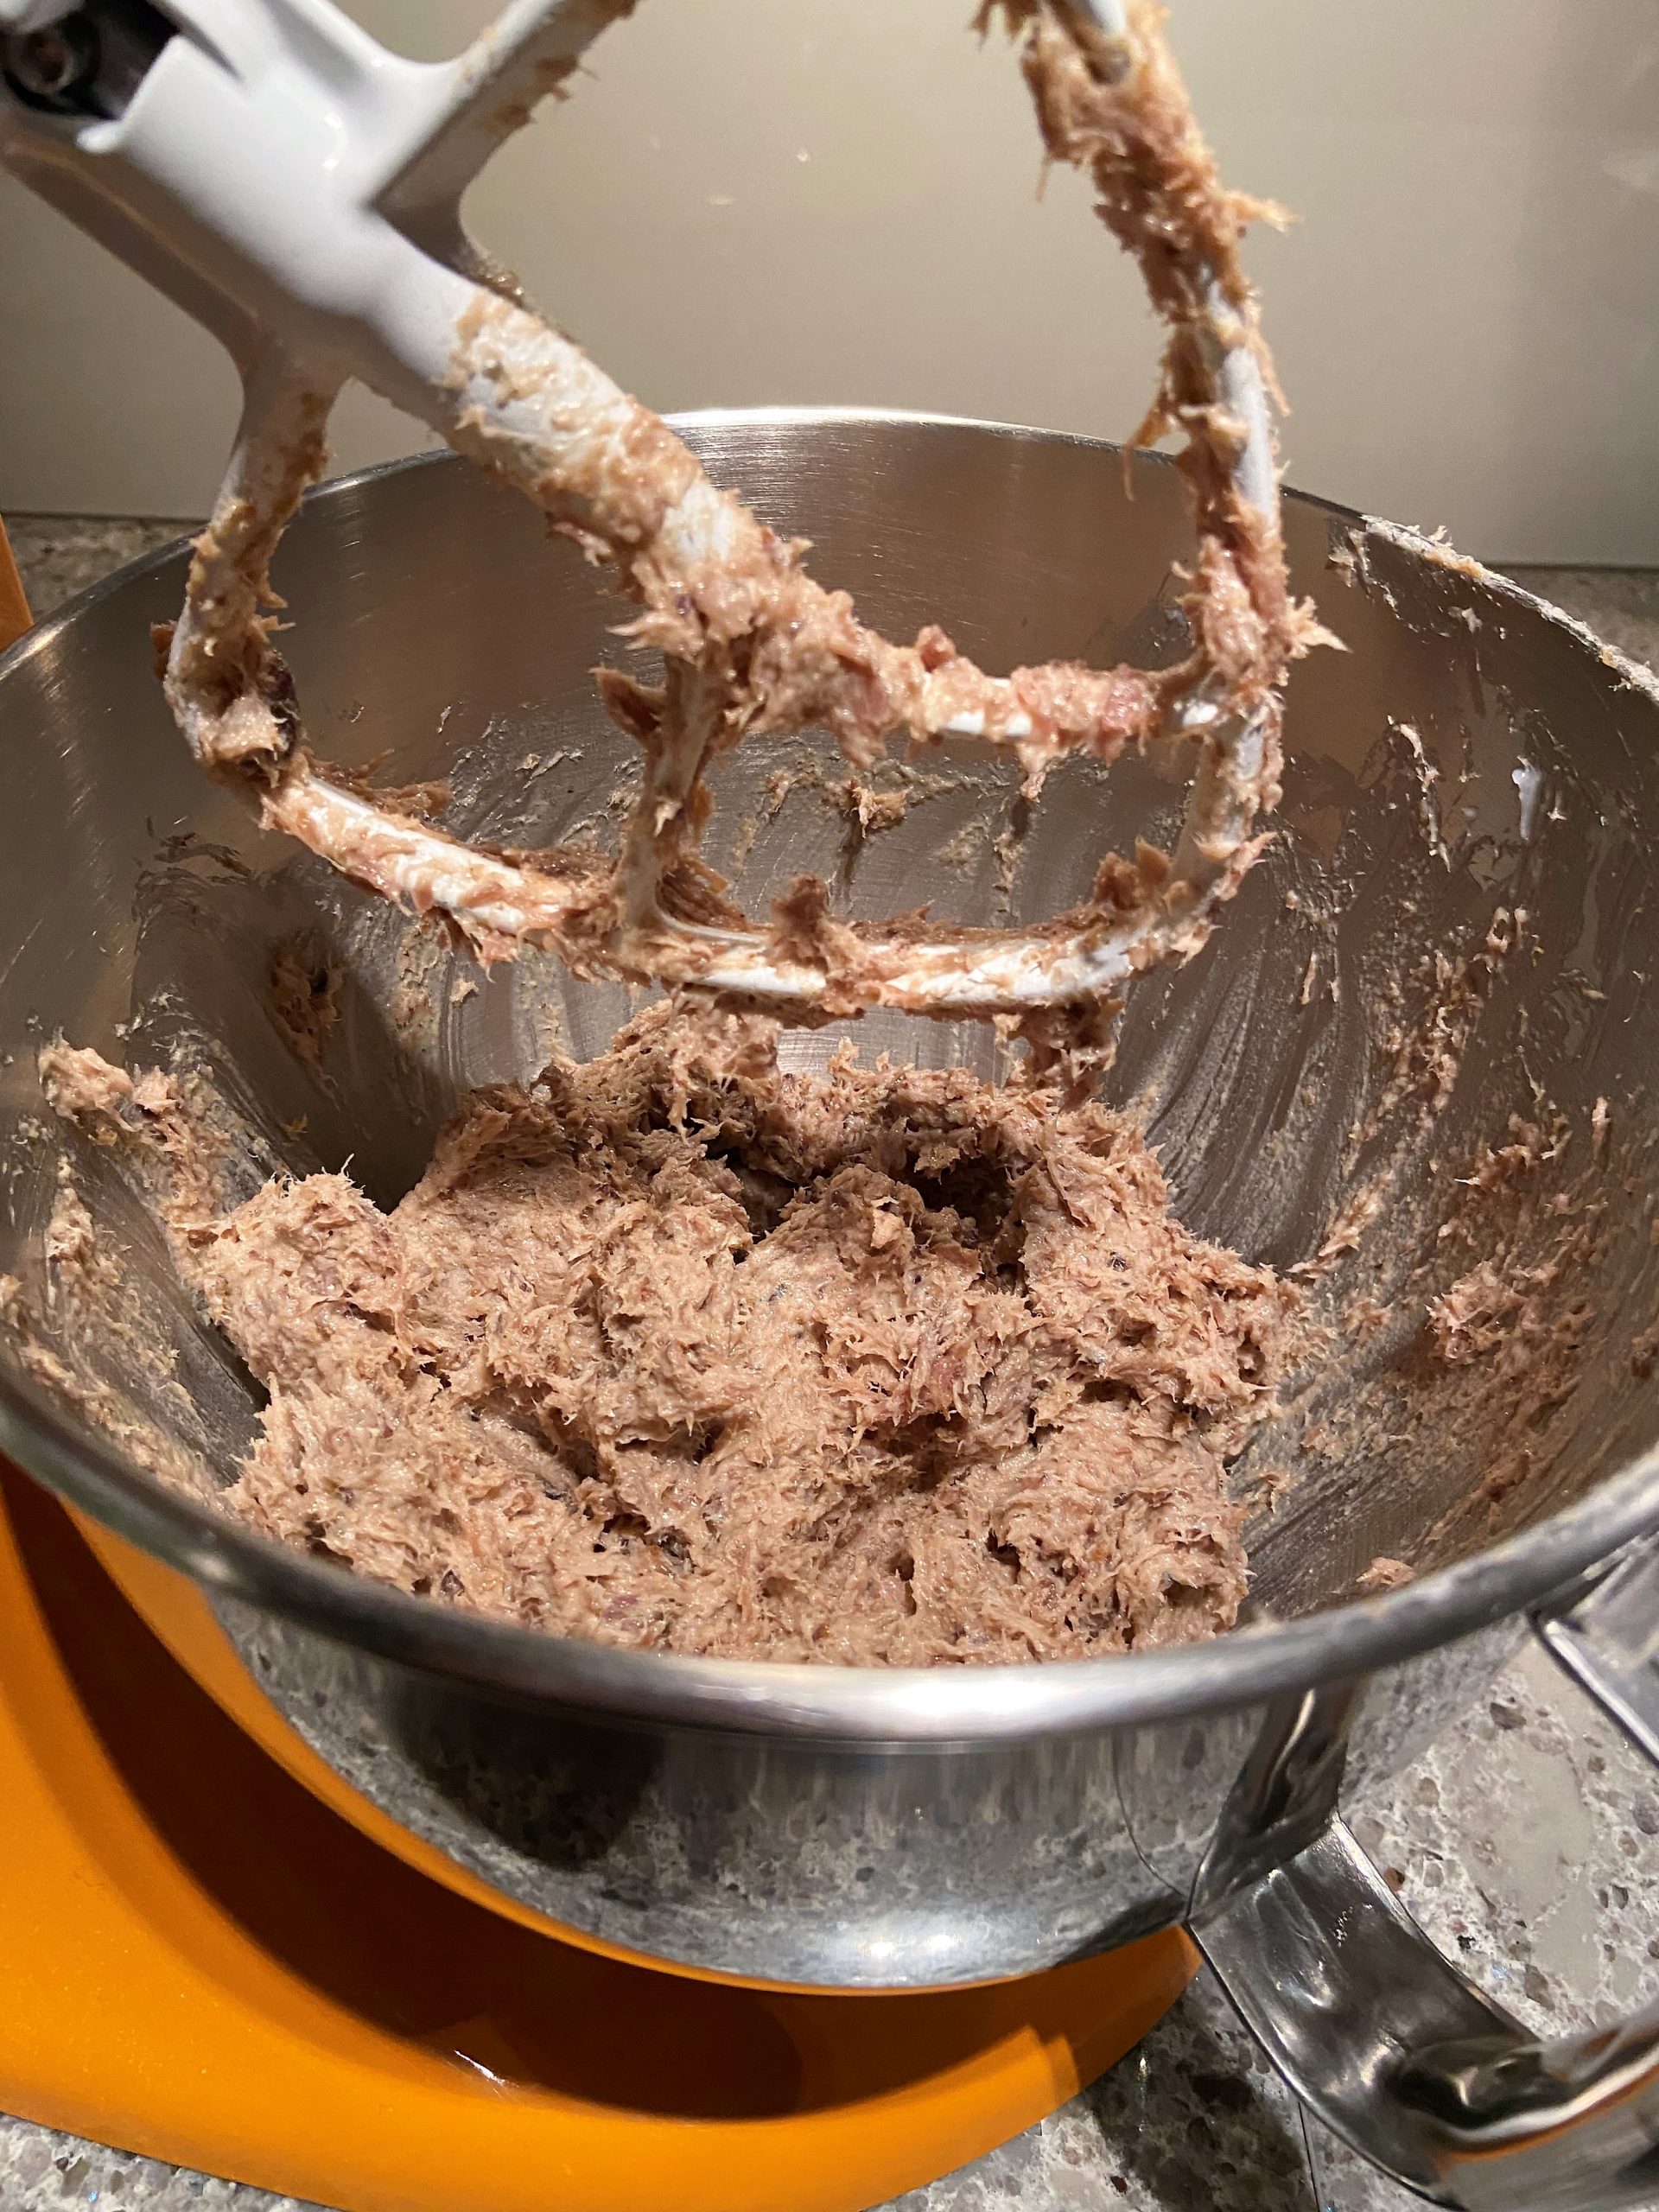 mix the shredded pork with lard in a mixer